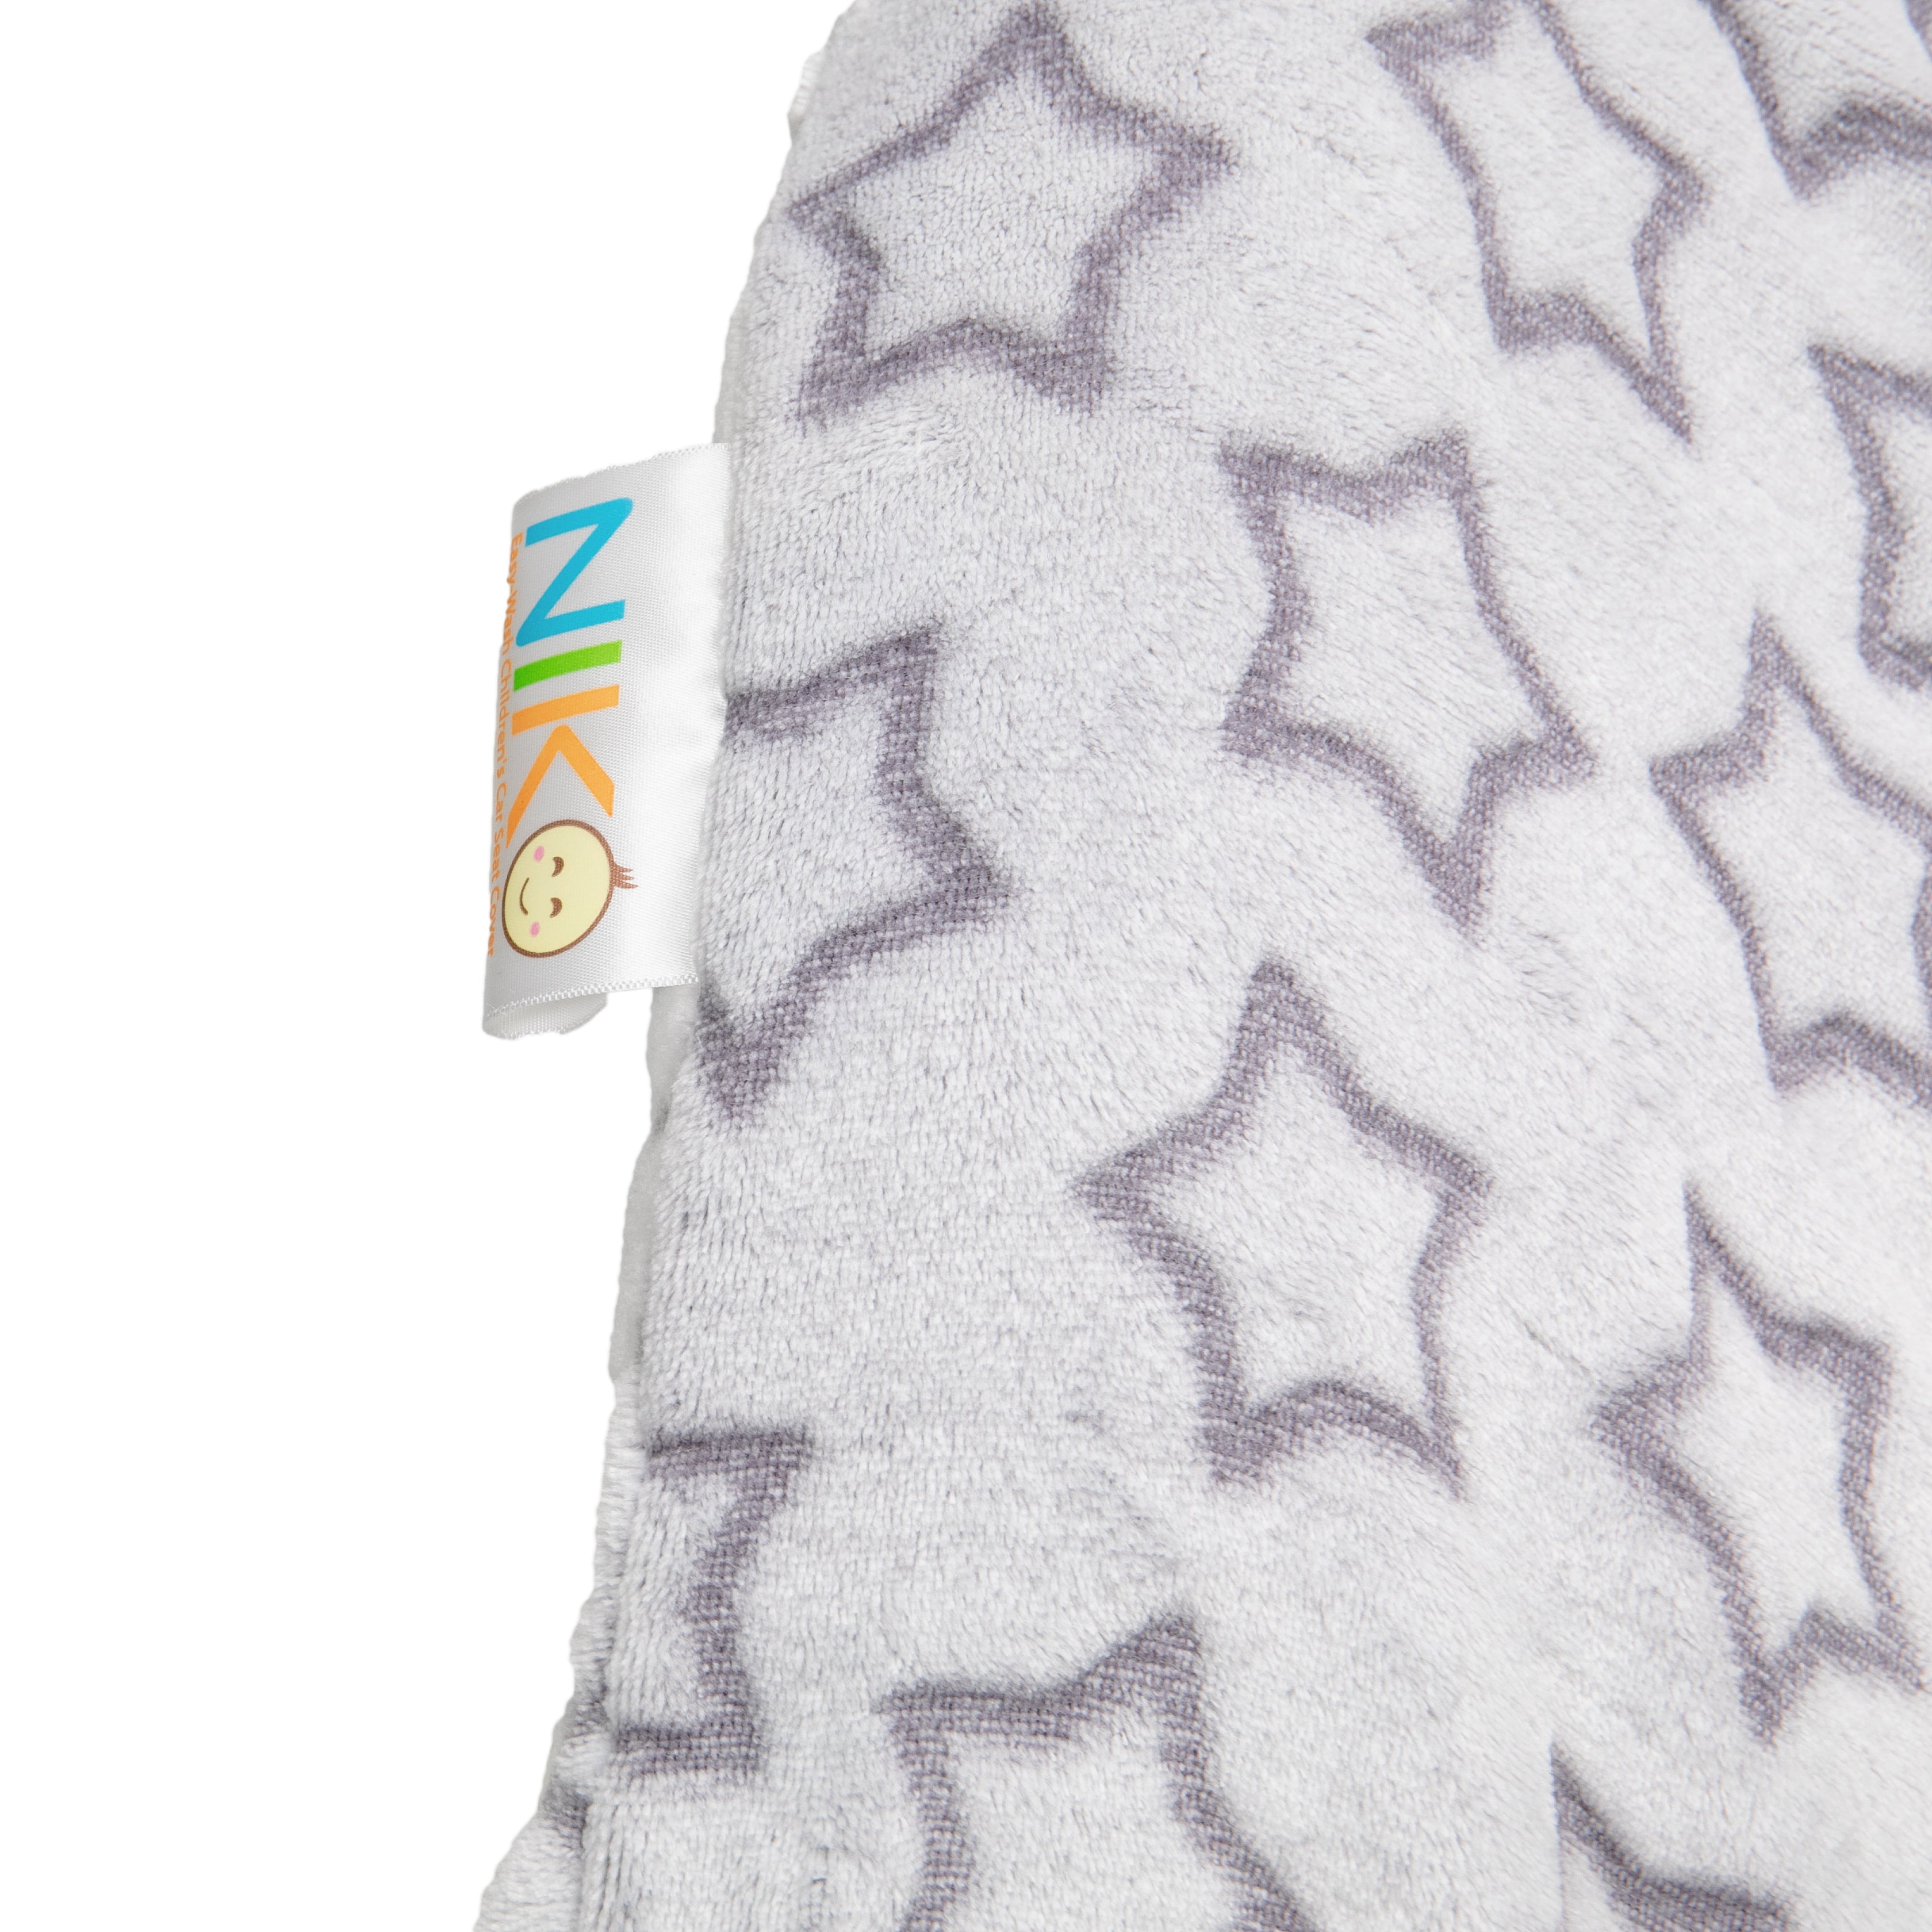 Niko Easy Wash Children's Car Seat Cover & Liner - Minky - Silver Star